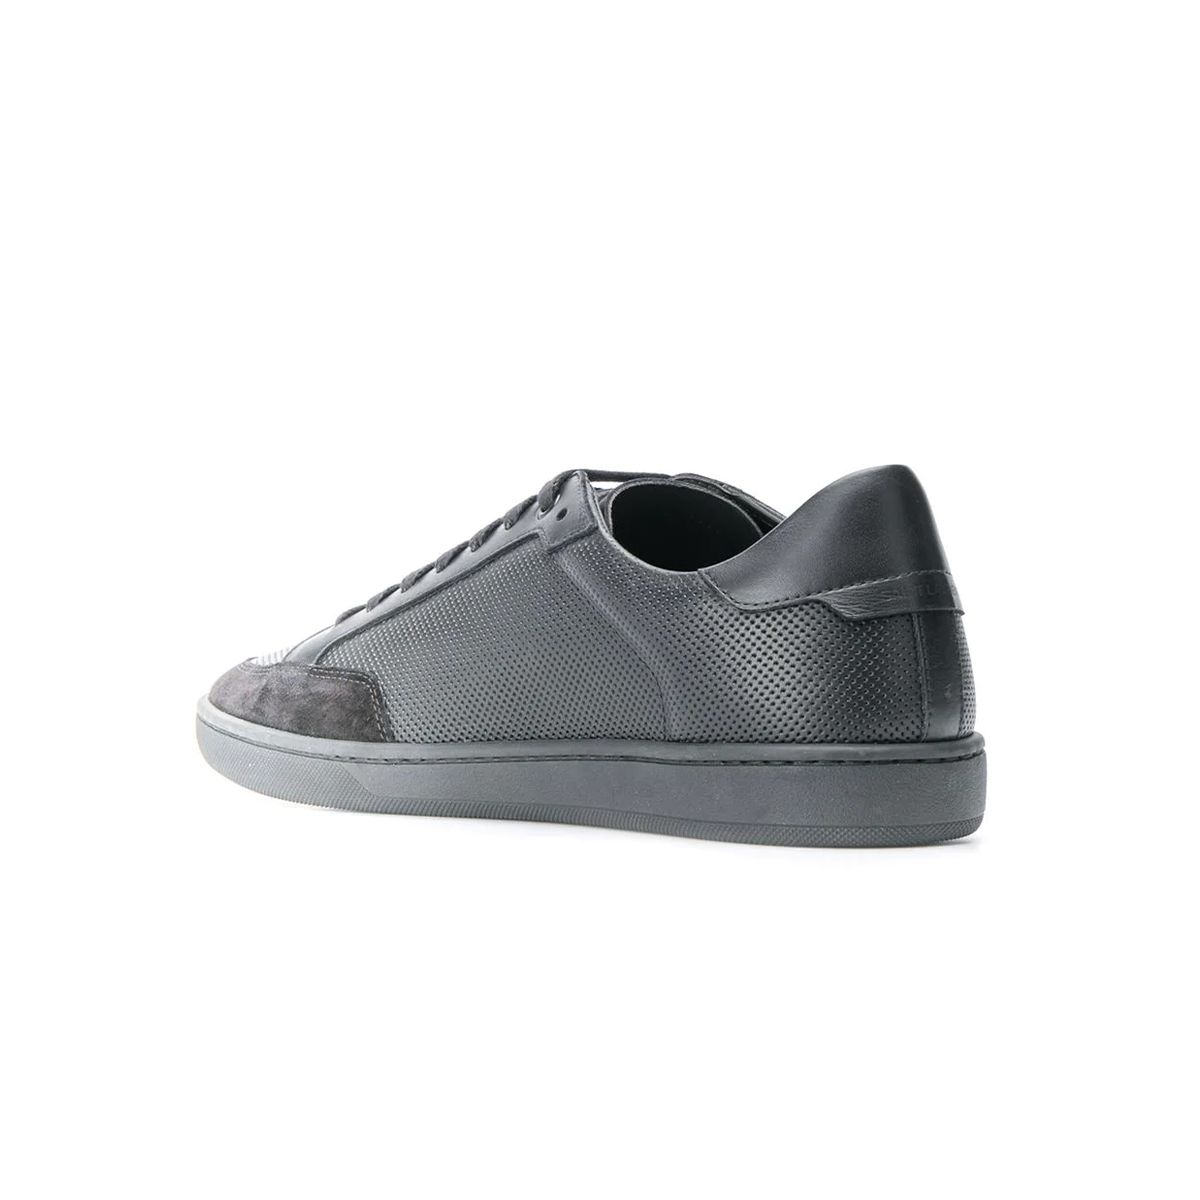 Court Classic SL/10 Low-Top Sneakers